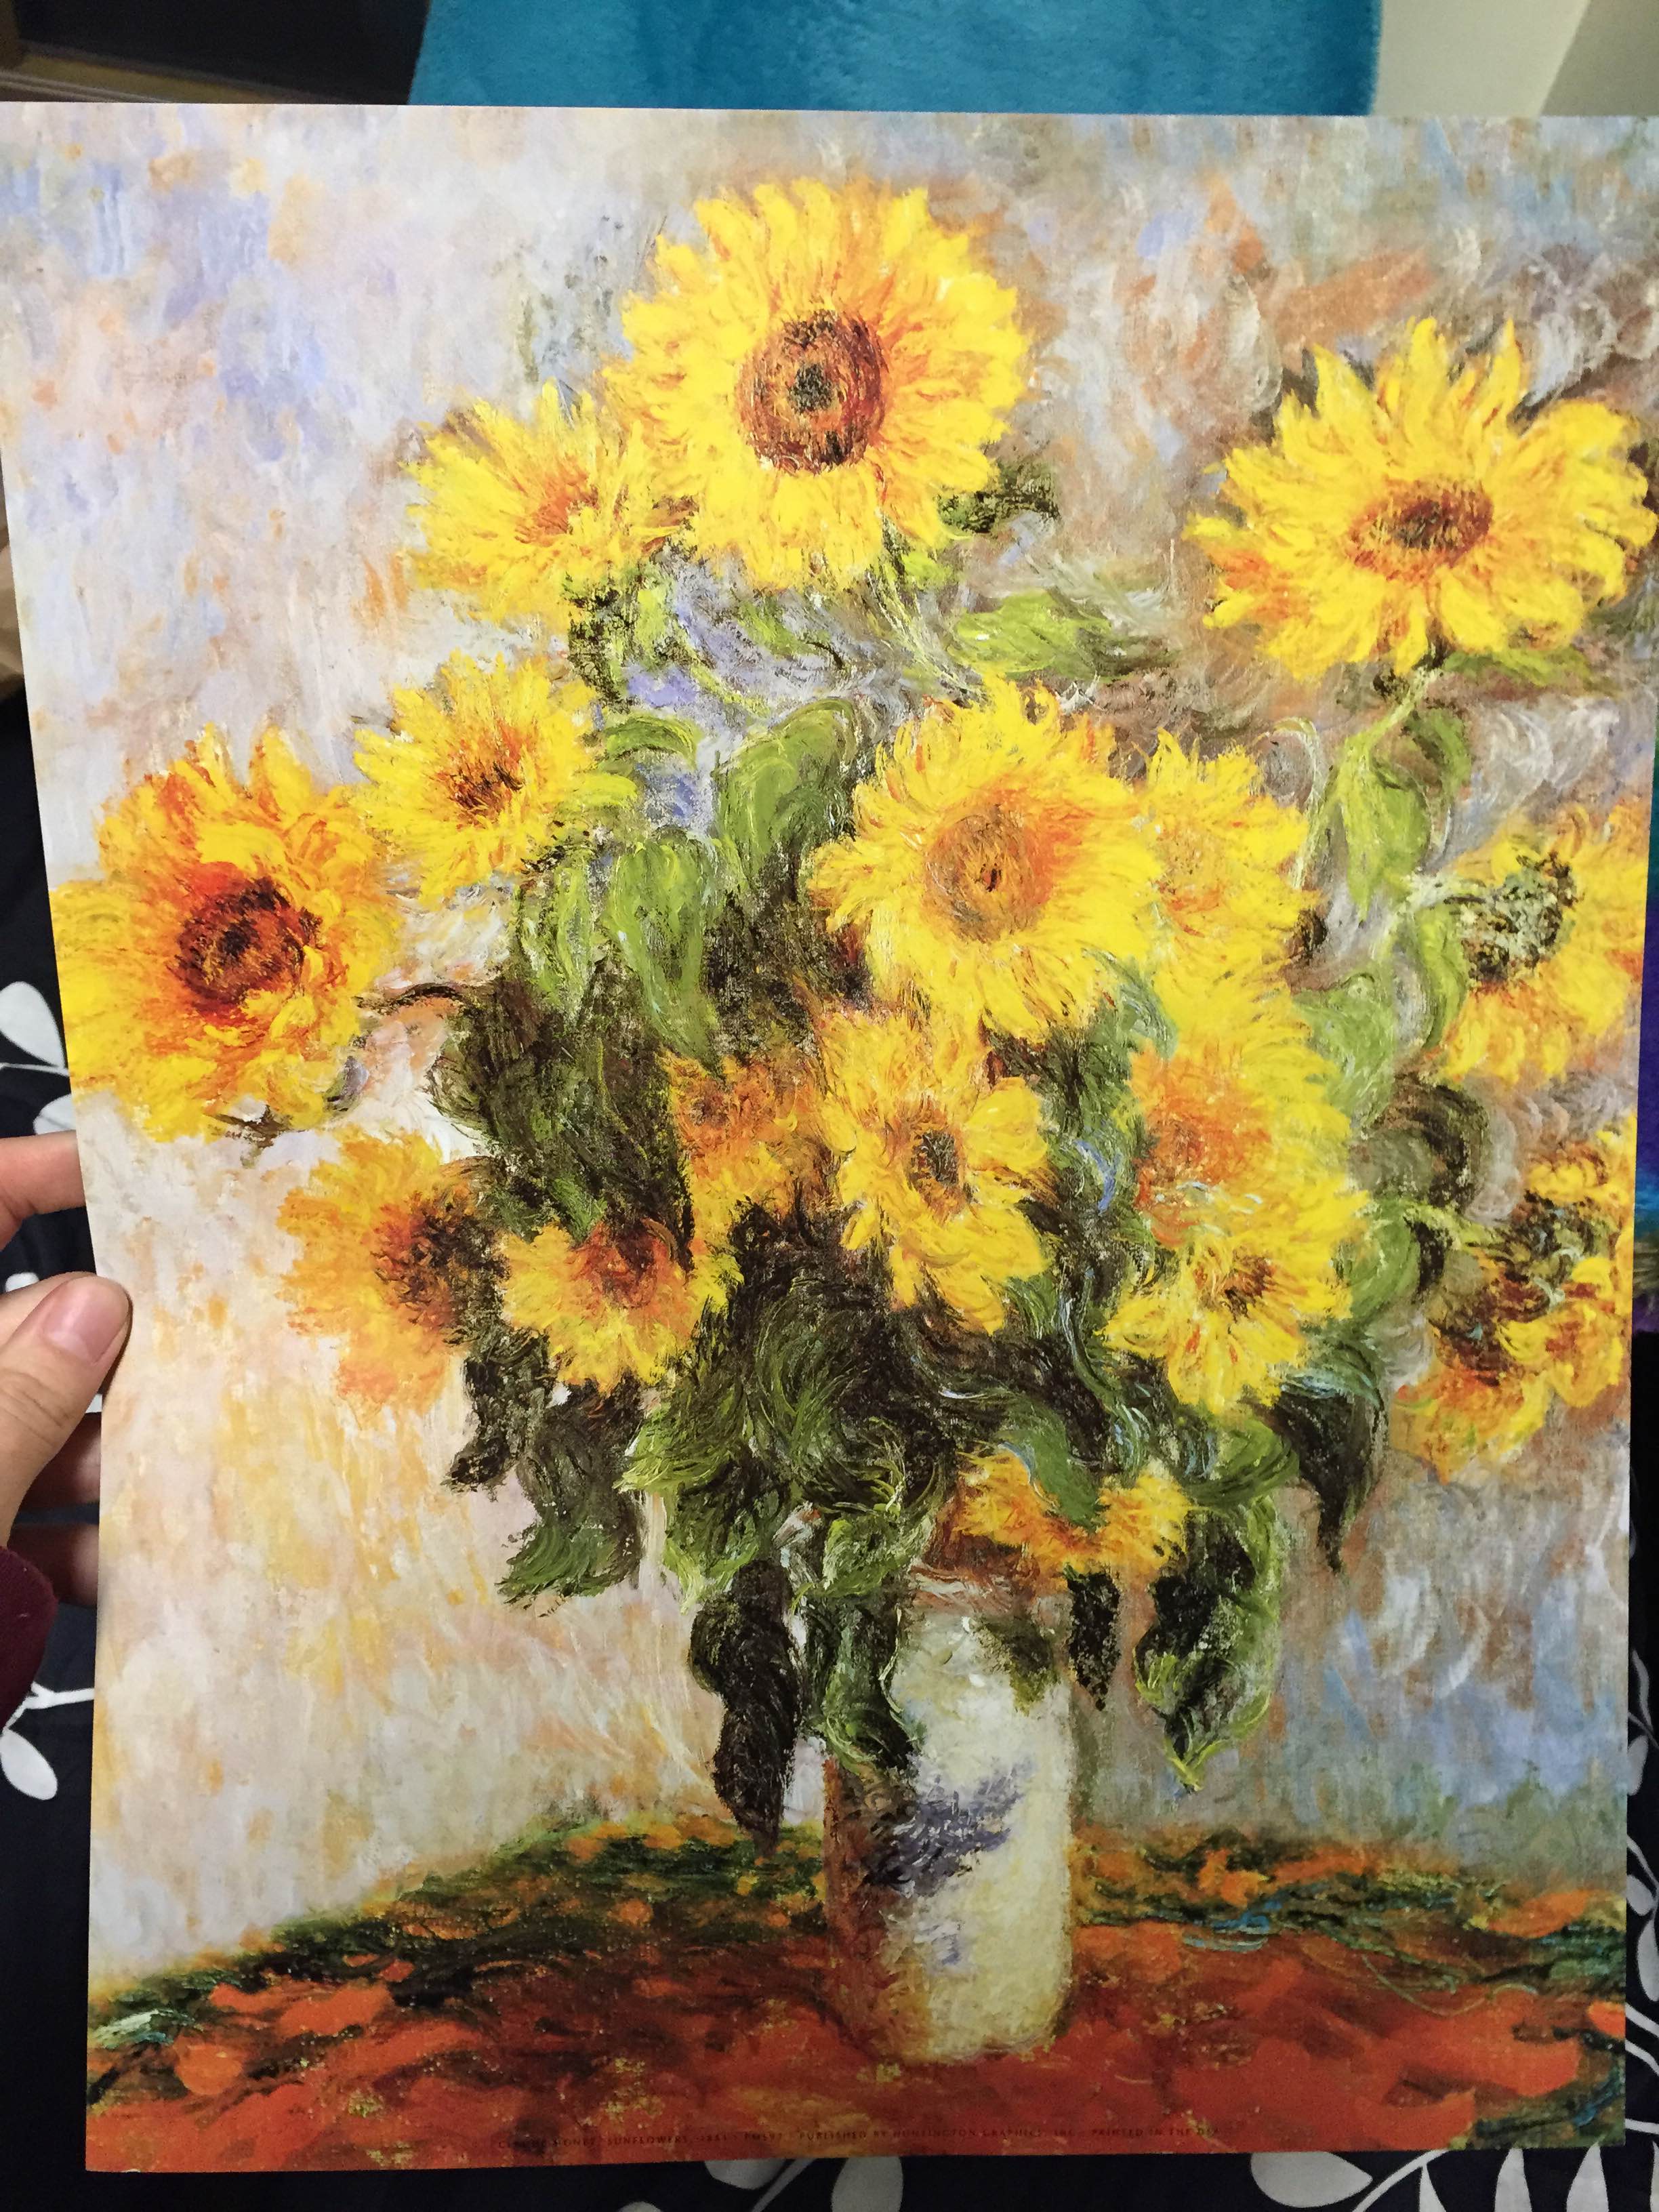 My find from the poster sale! since I love sunflowers I thought it was perfect.